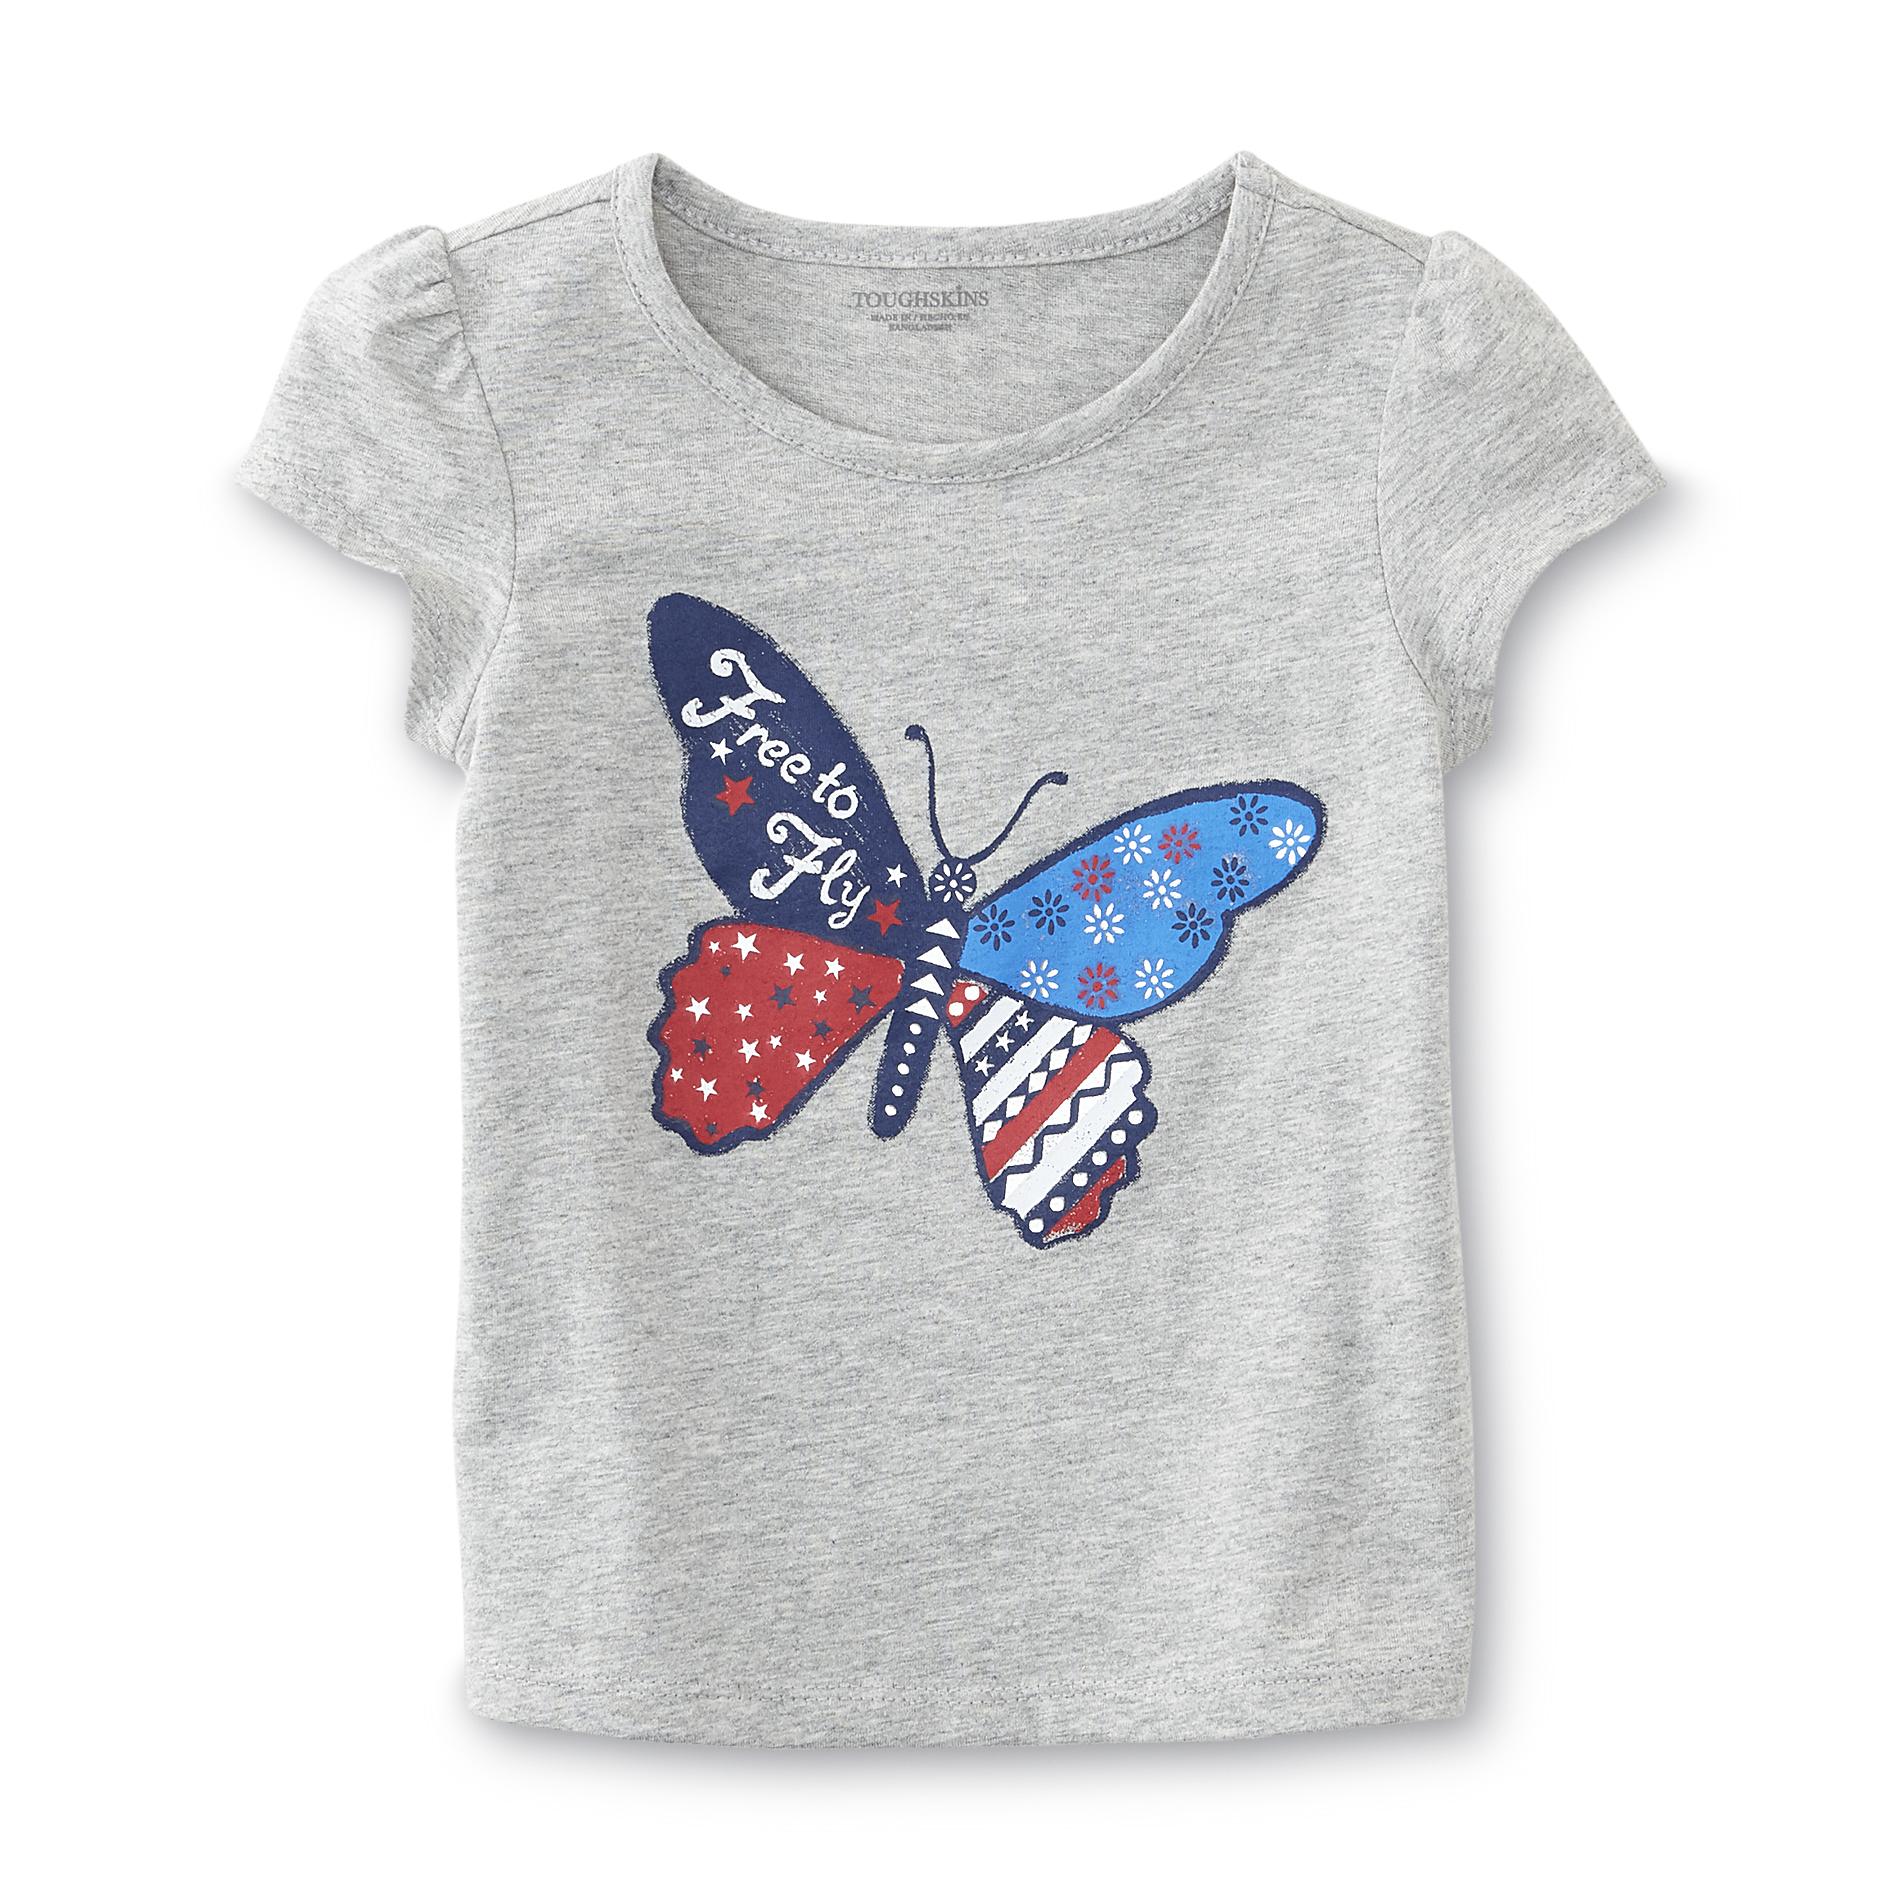 Toughskins Infant & Toddler Girl's Graphic T-Shirt - Butterfly